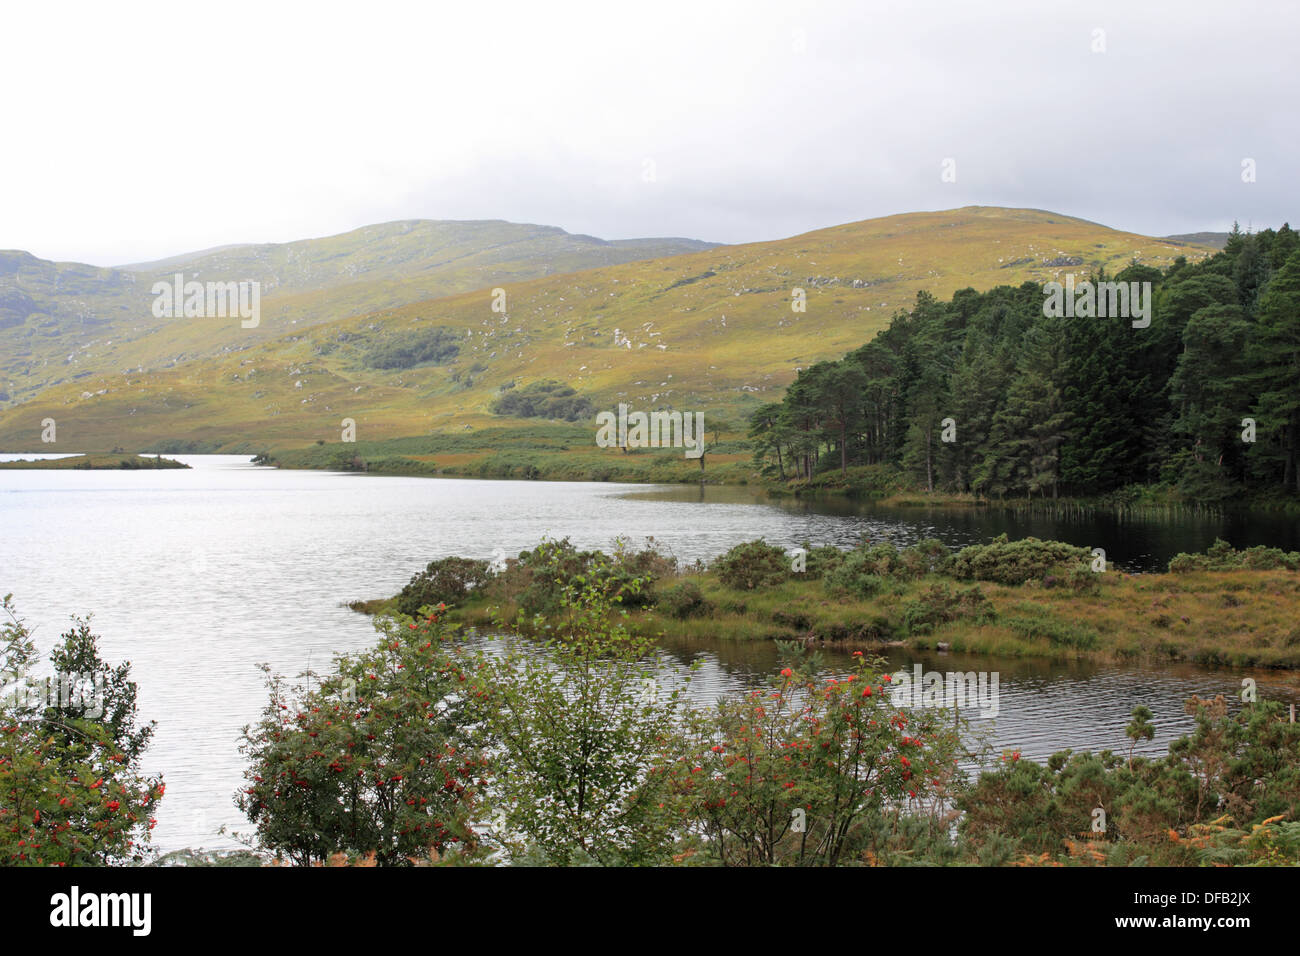 Lough Beagh im Glenveagh National Park im County Donegal, Irland. Stockfoto